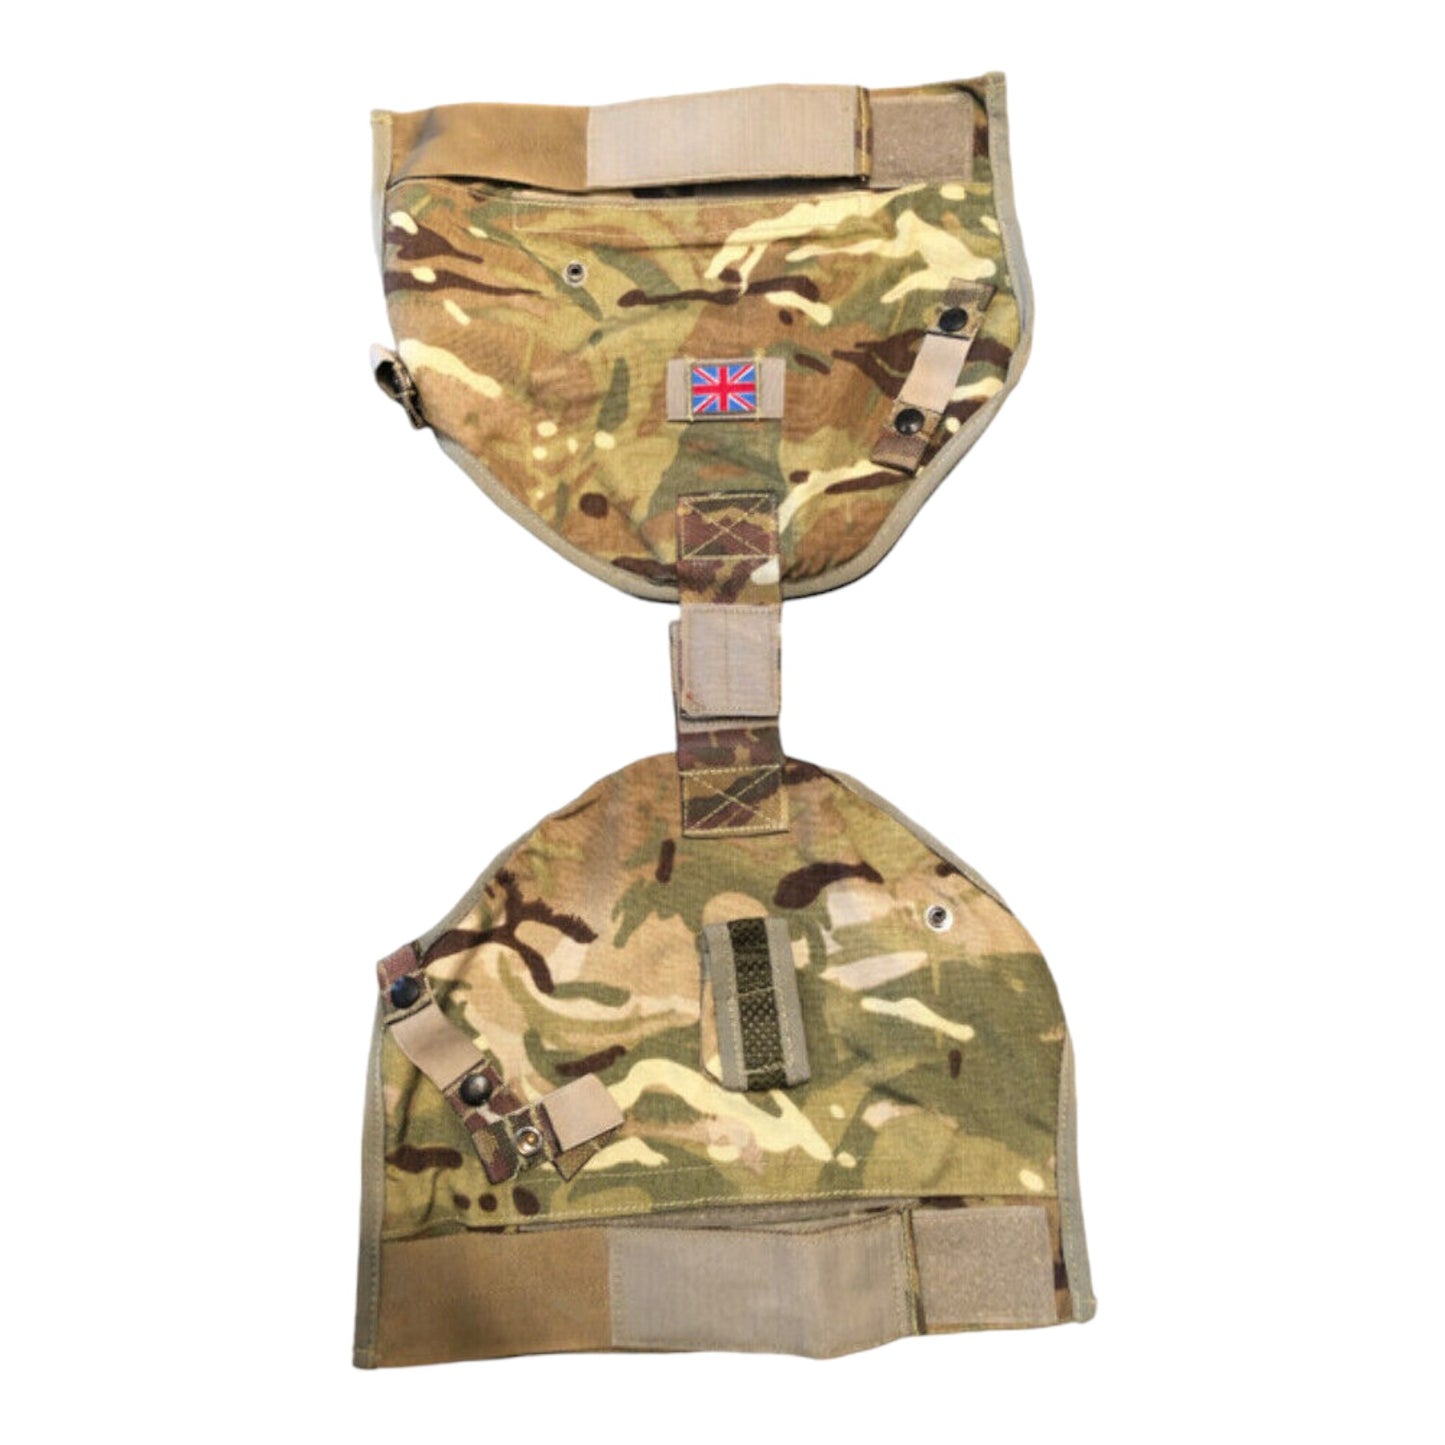 British Army cover brassard- osprey Mk 4 MTP for body cover